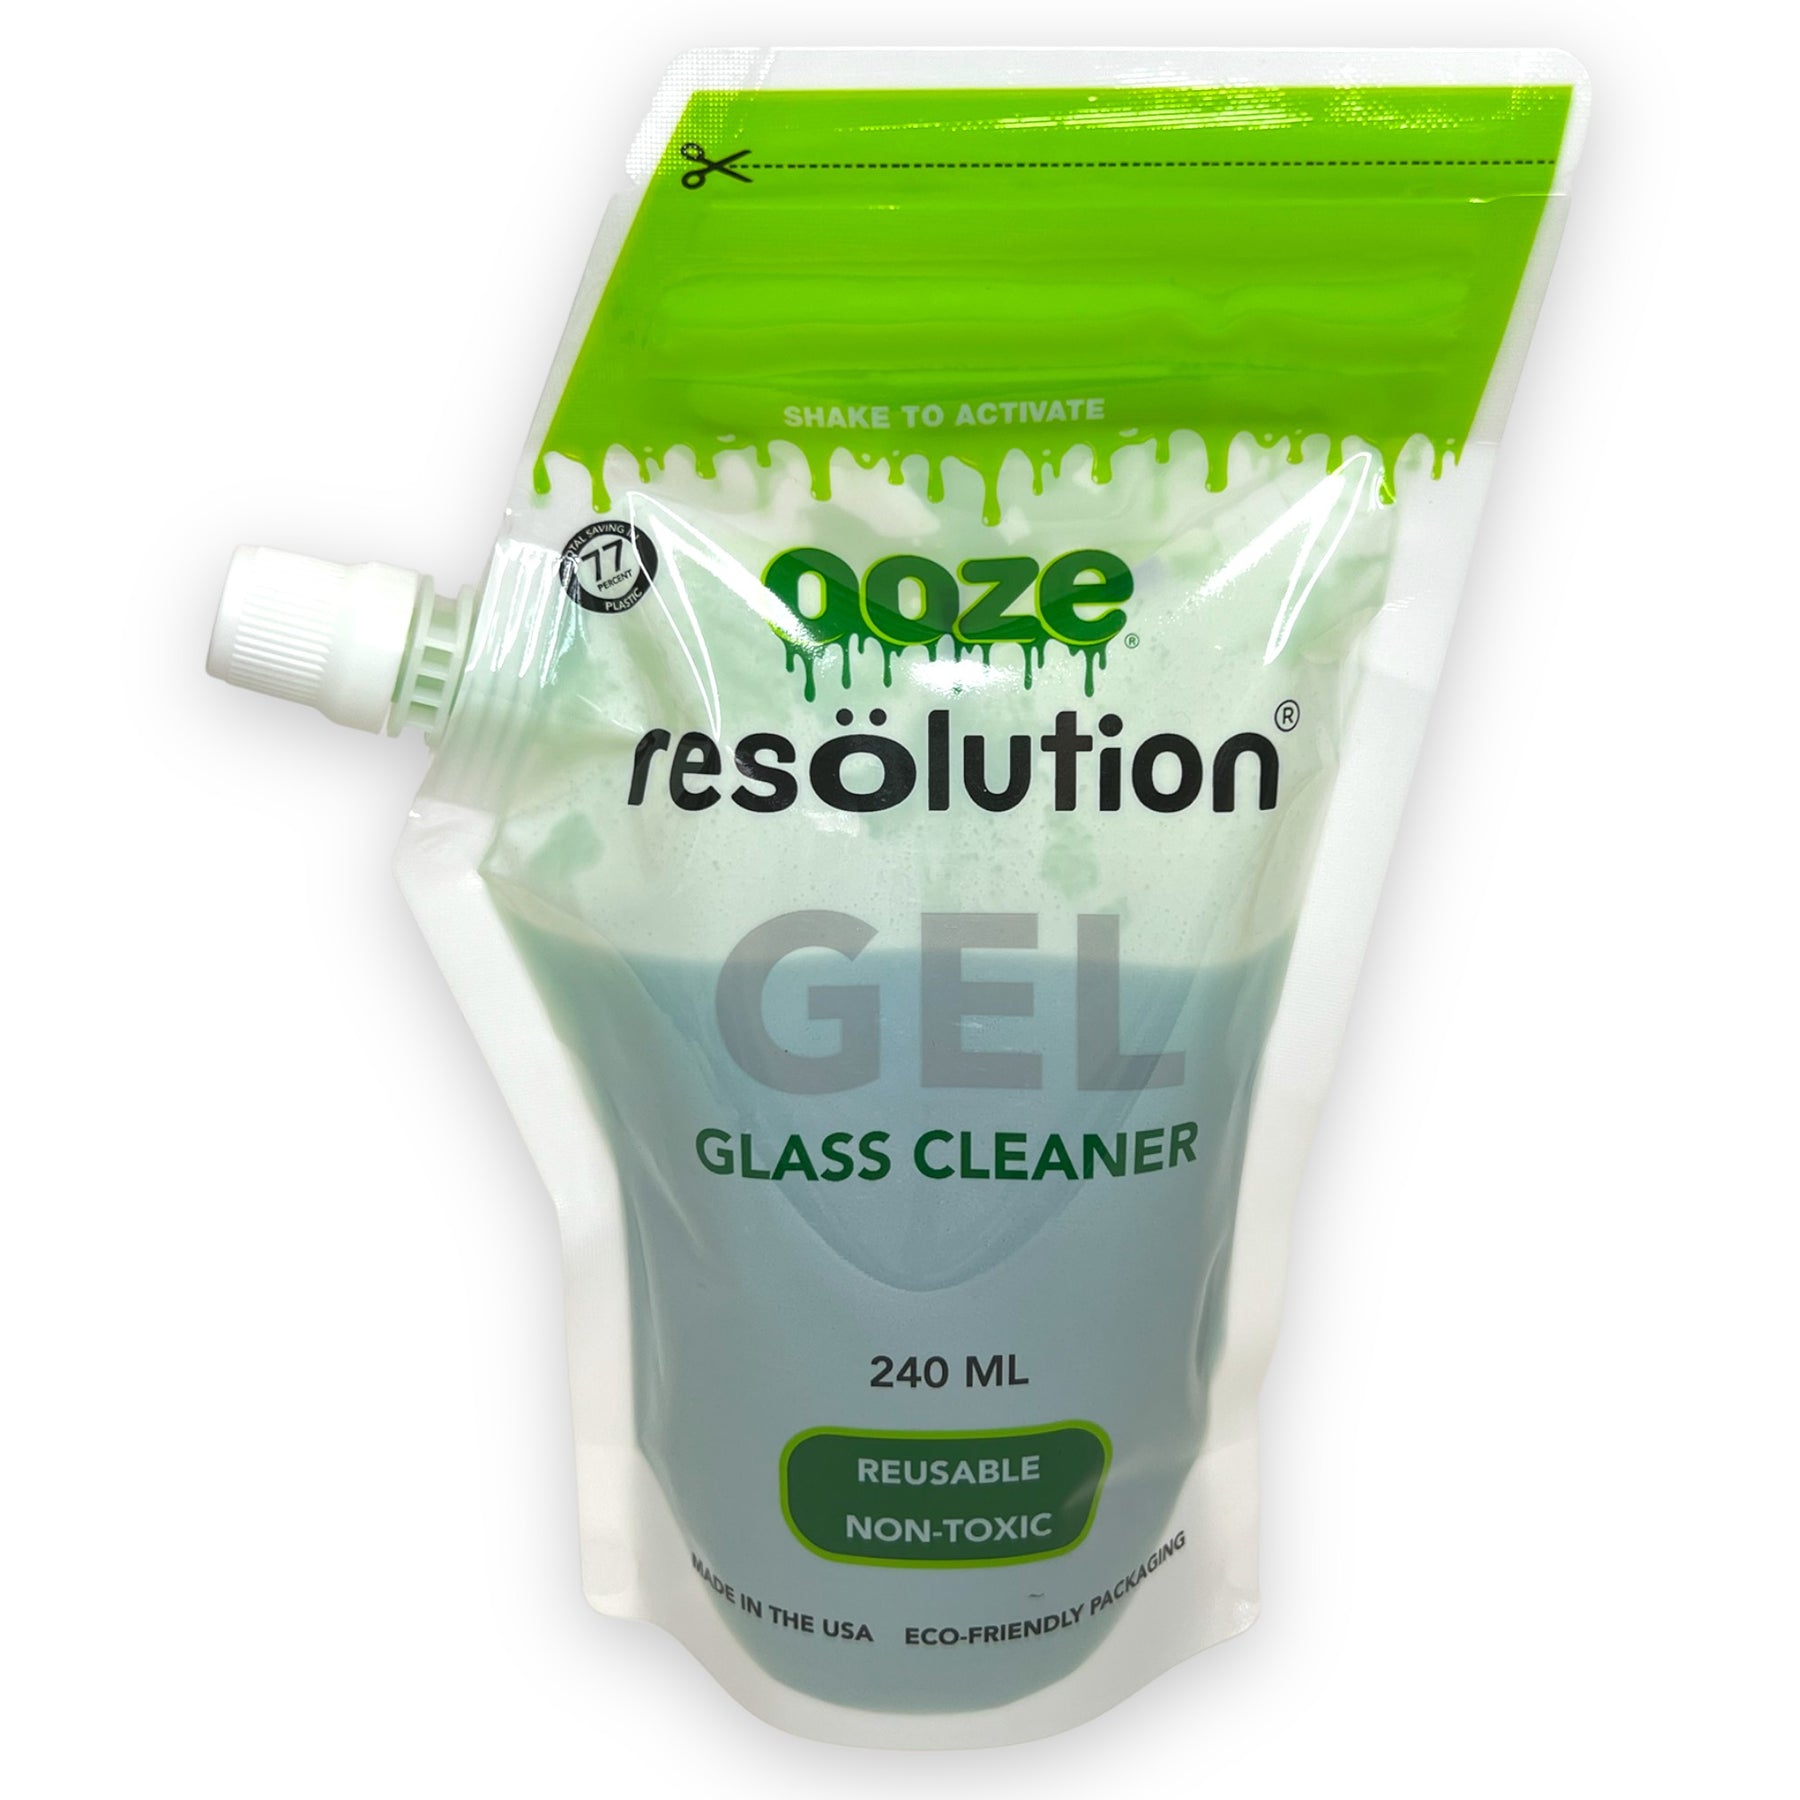 Ooze Glass Cleaner 